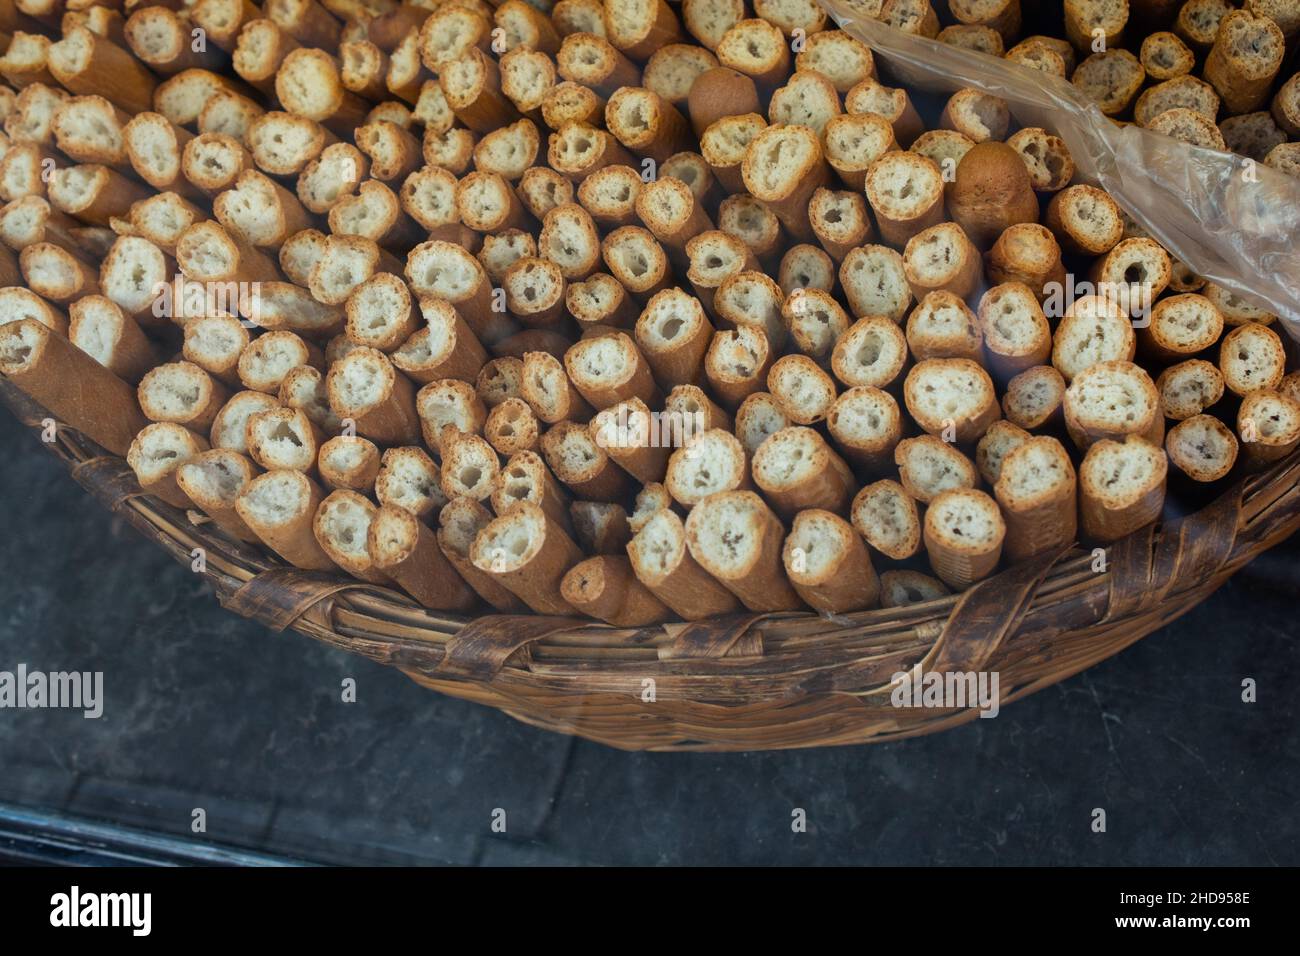 Closeup of carbs in a basket Stock Photo